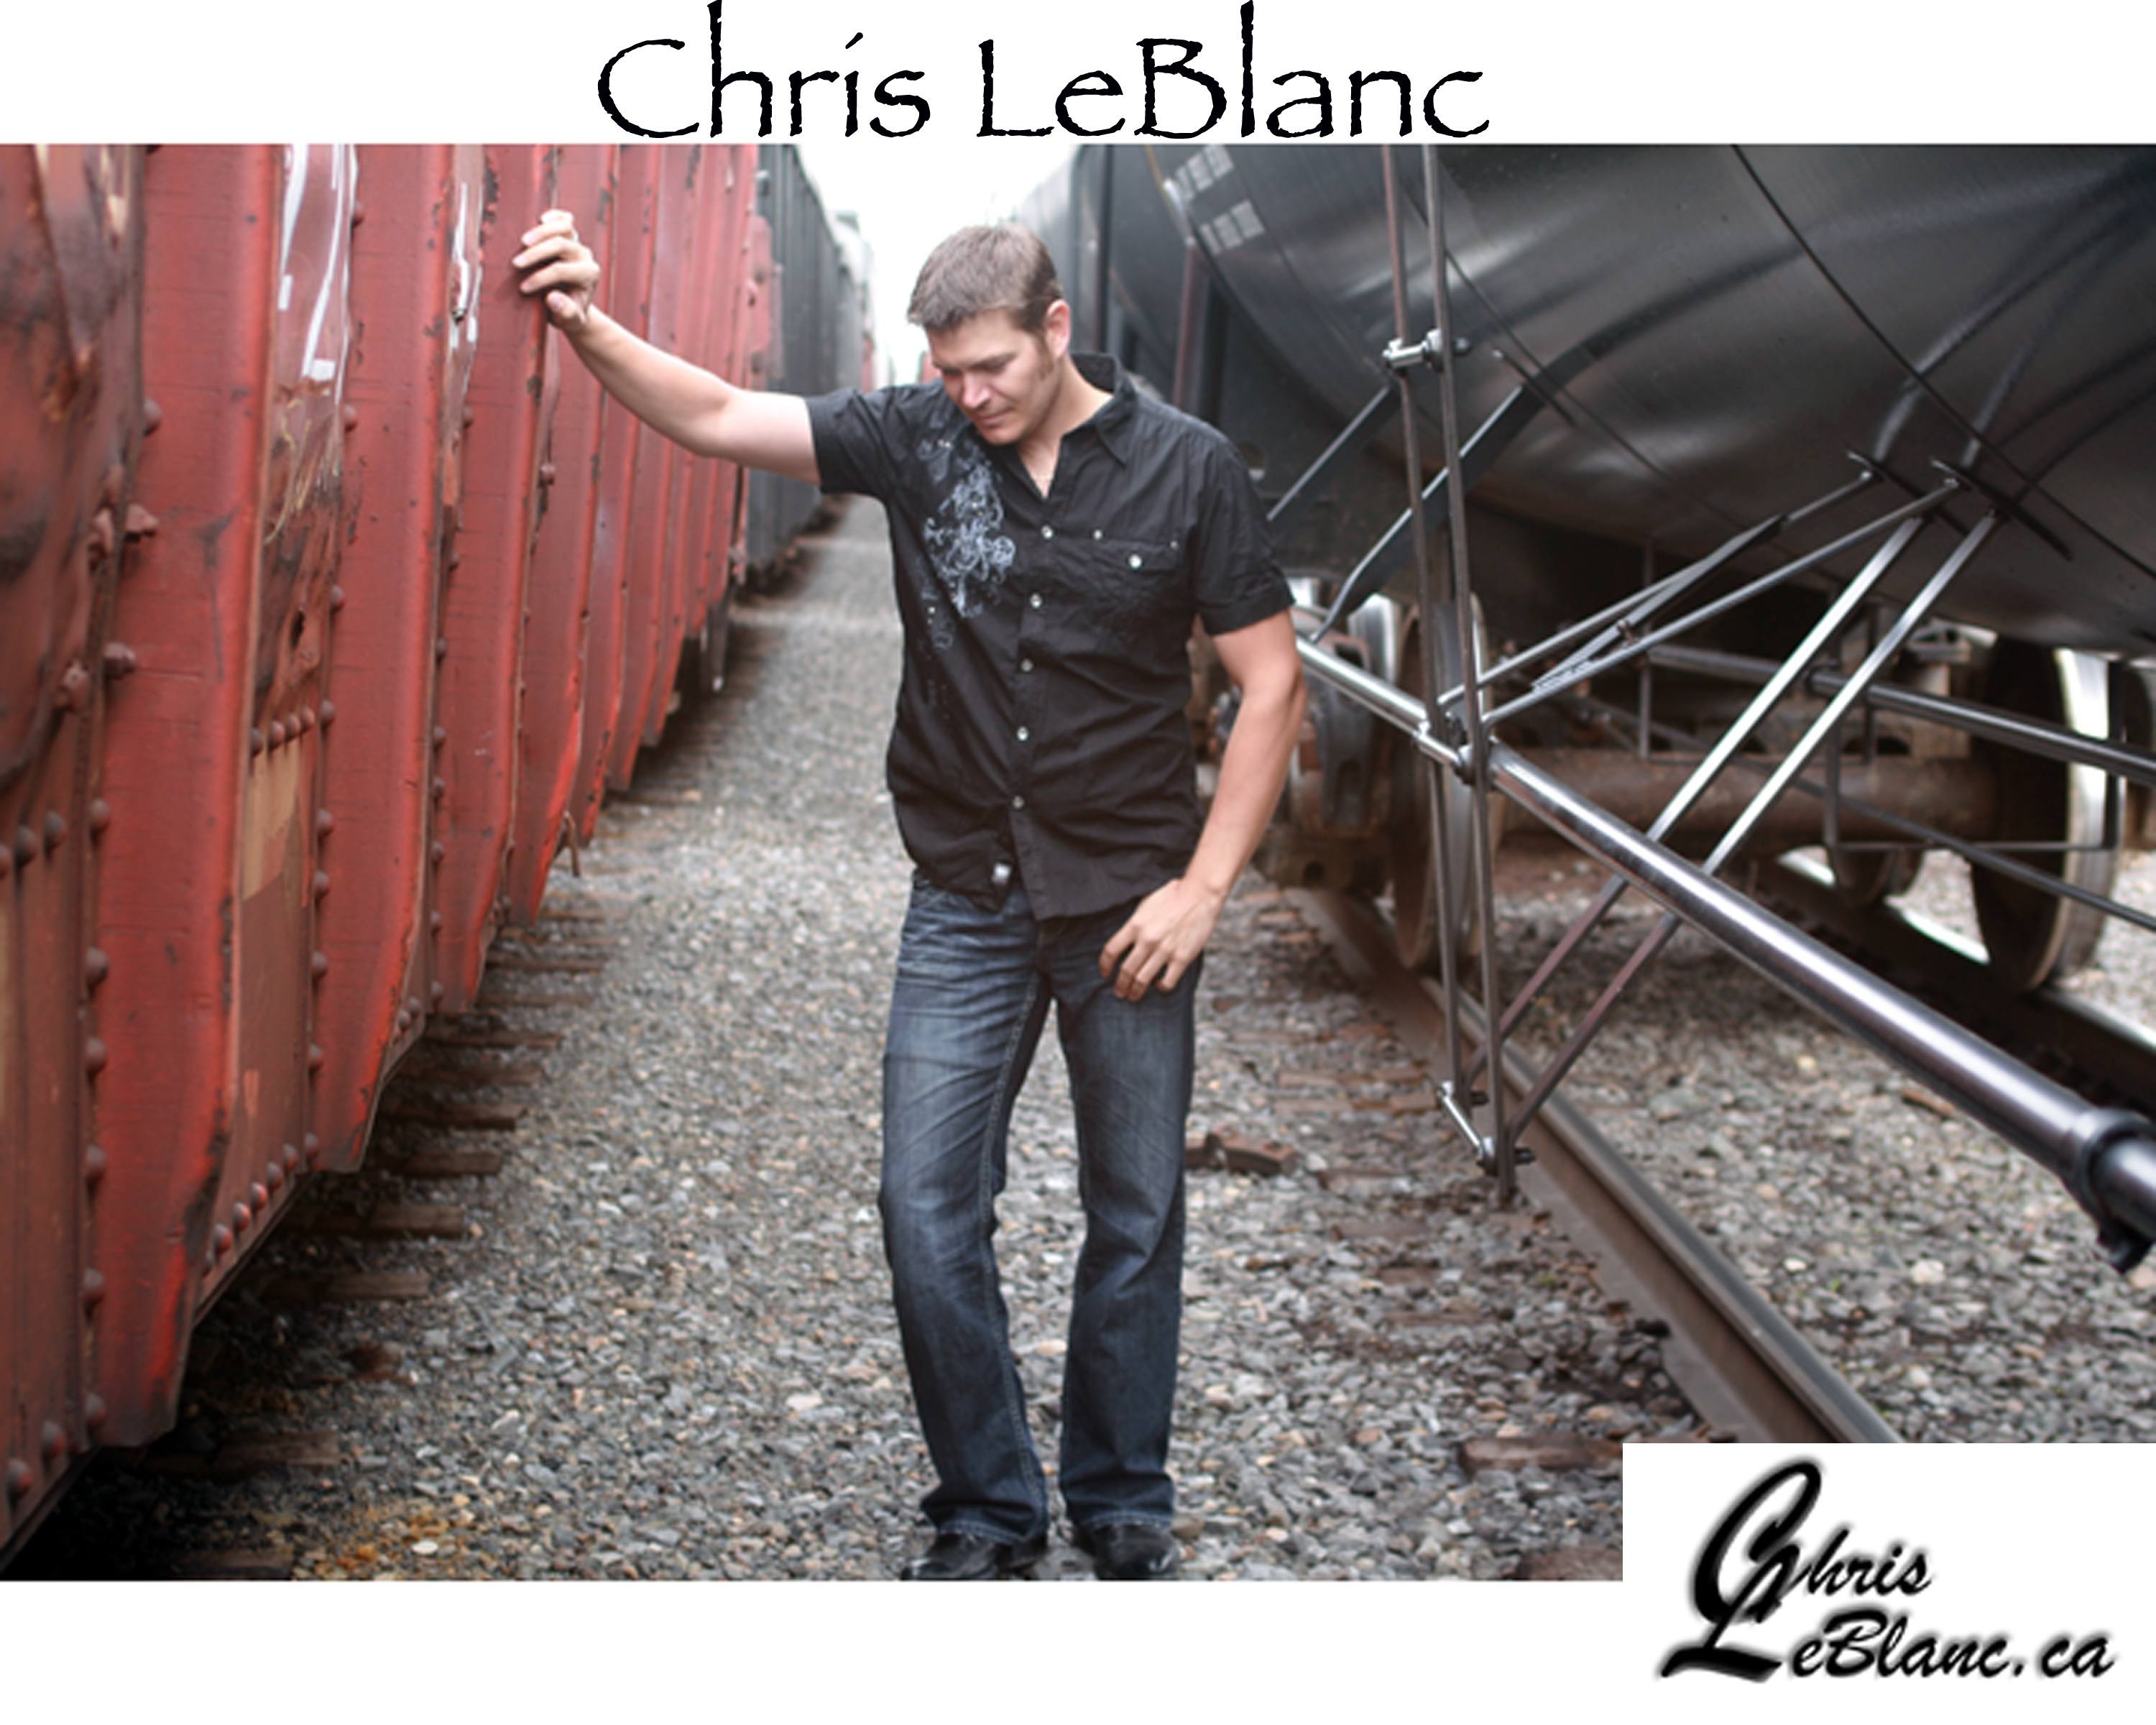 EMERGING – Singer Chris LeBlanc is looking forward to sharing his music with audiences at the Central Music Festival next month.